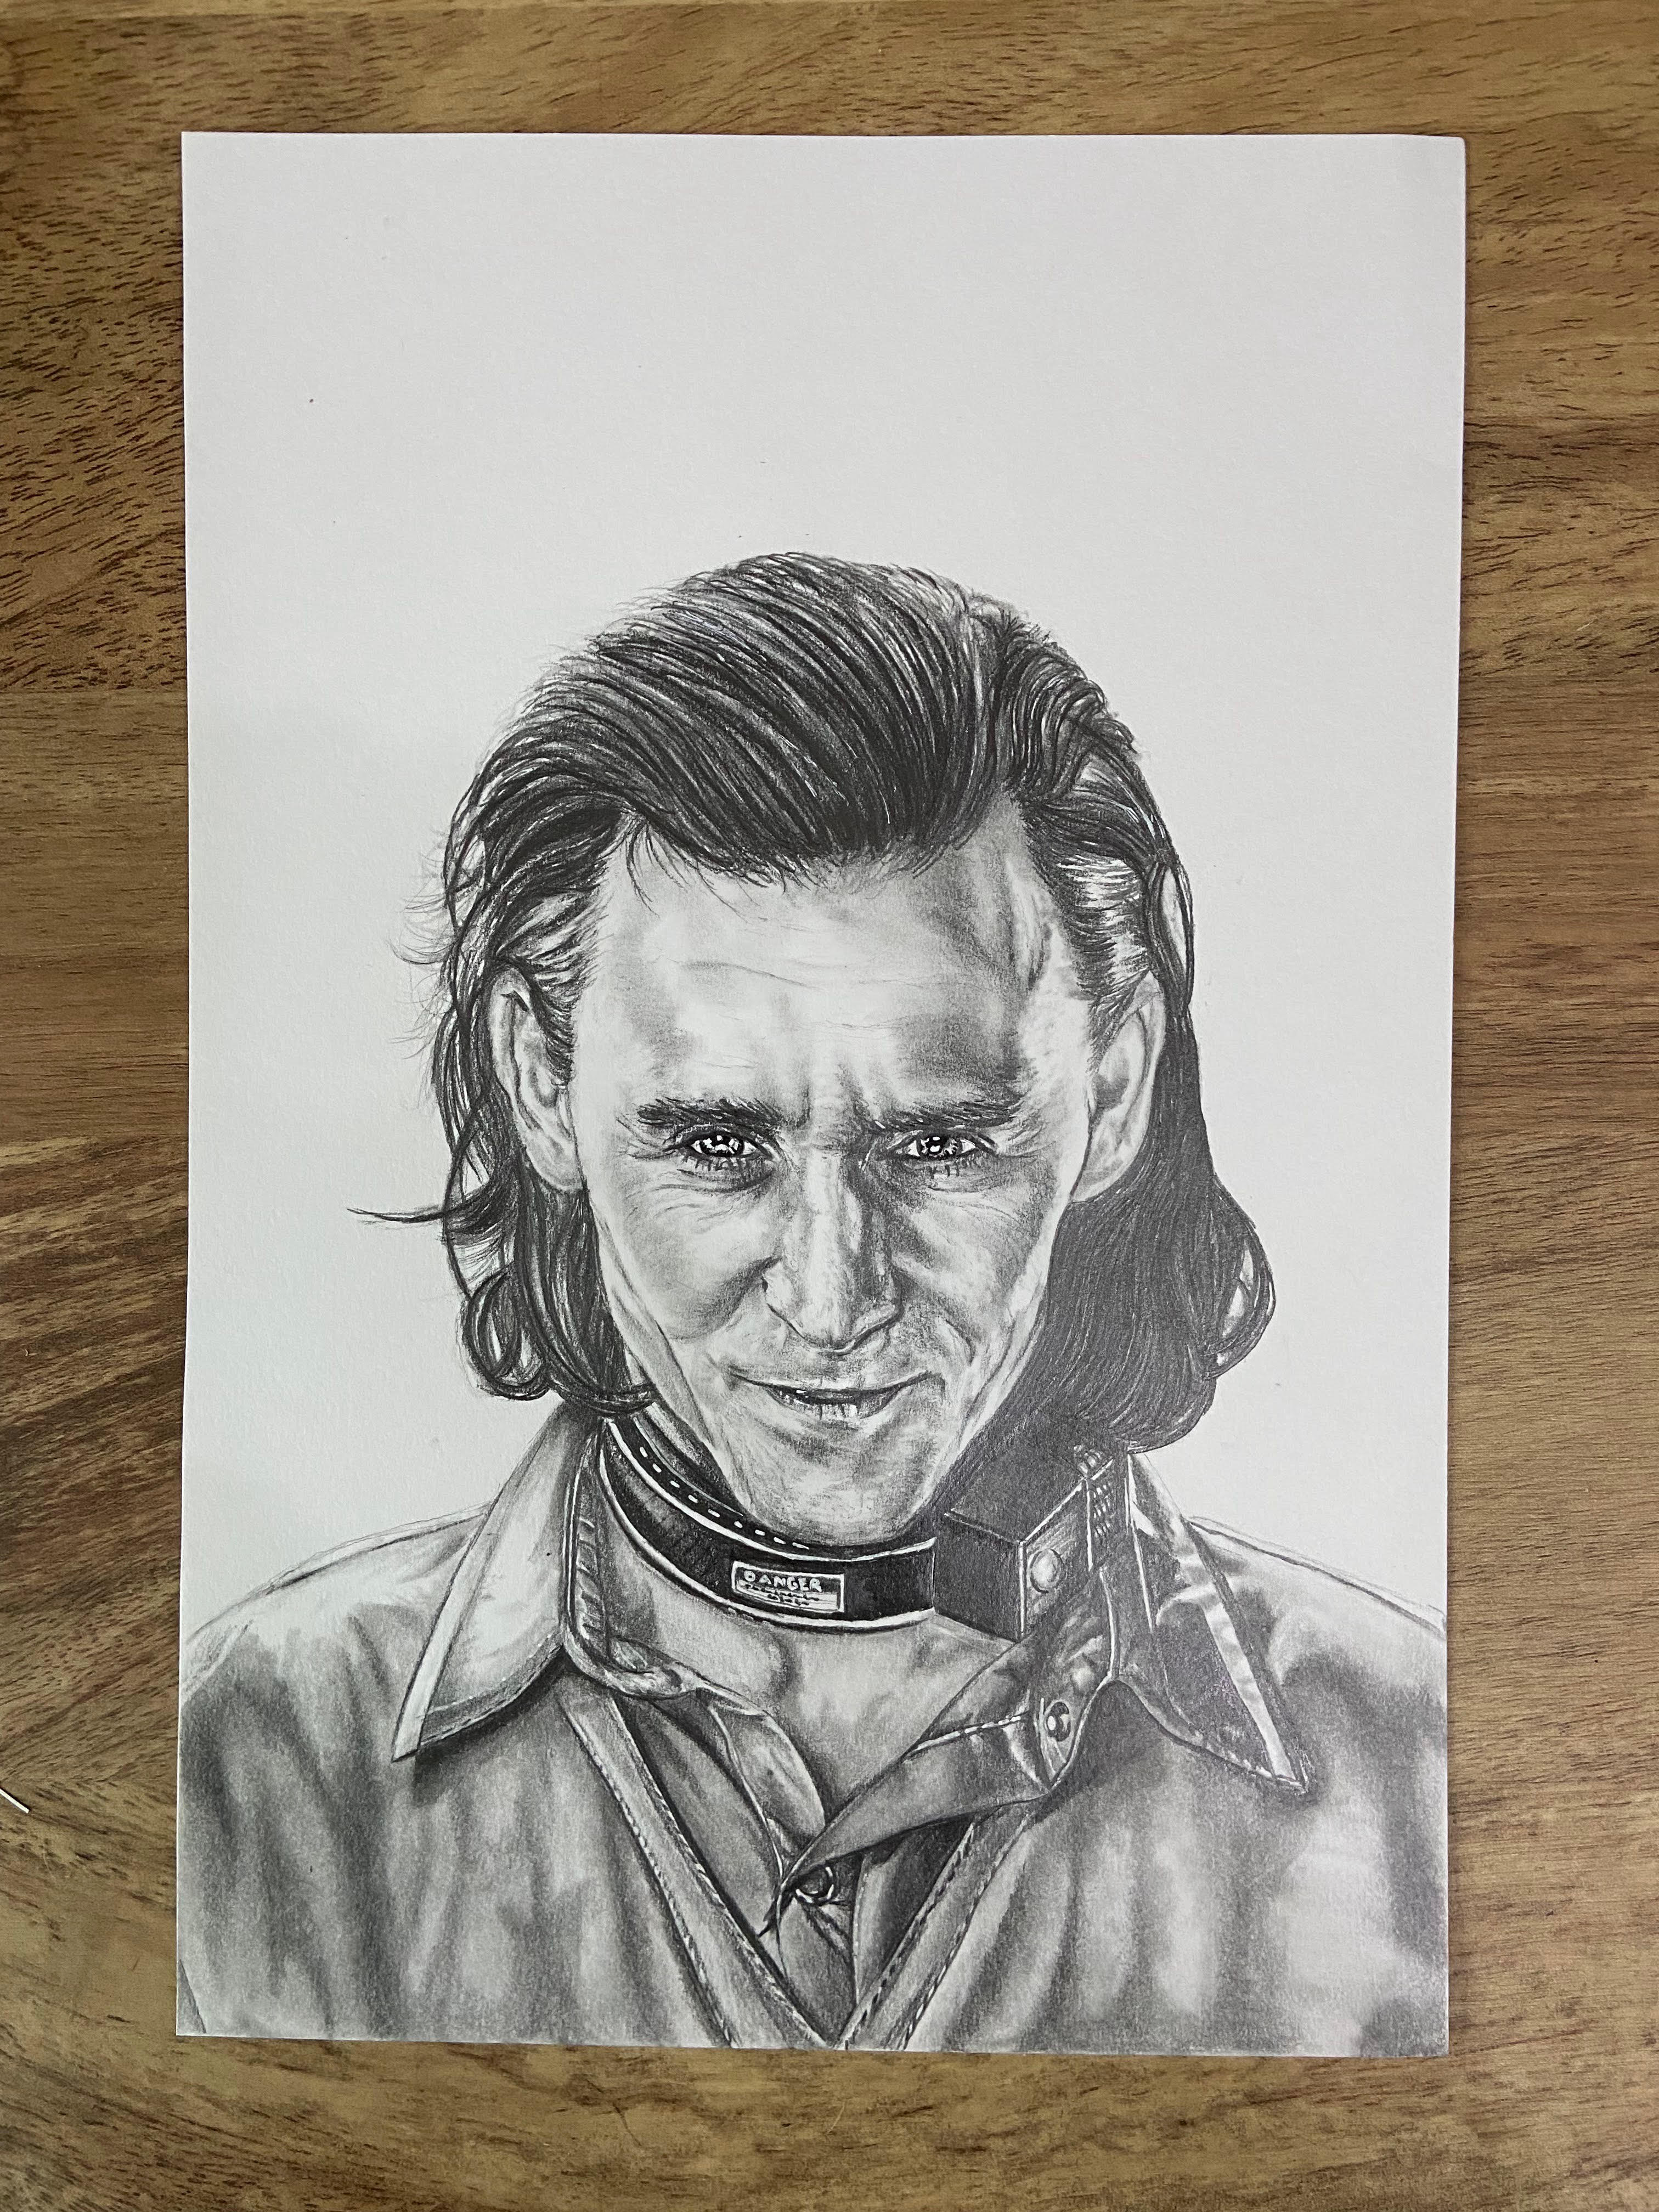 Pencil drawing of Loki from the Marvel TV show 'Loki'